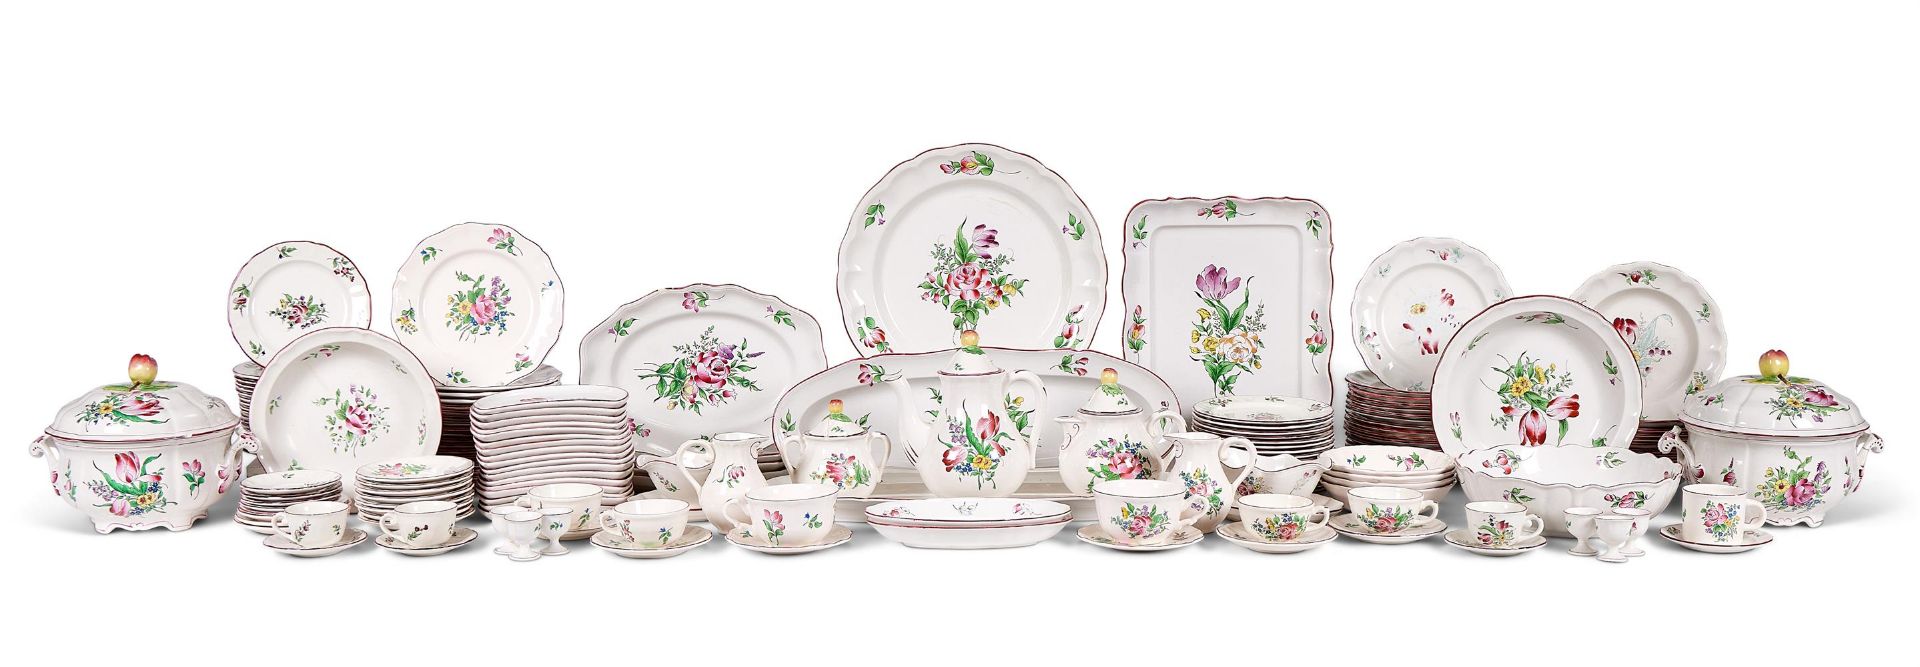 A COMPOSITE LUNEVILLE PART DINNER AND BREAKFAST SERVICE PRINTED AND PAINTED WITH FLORAL SPRAYS